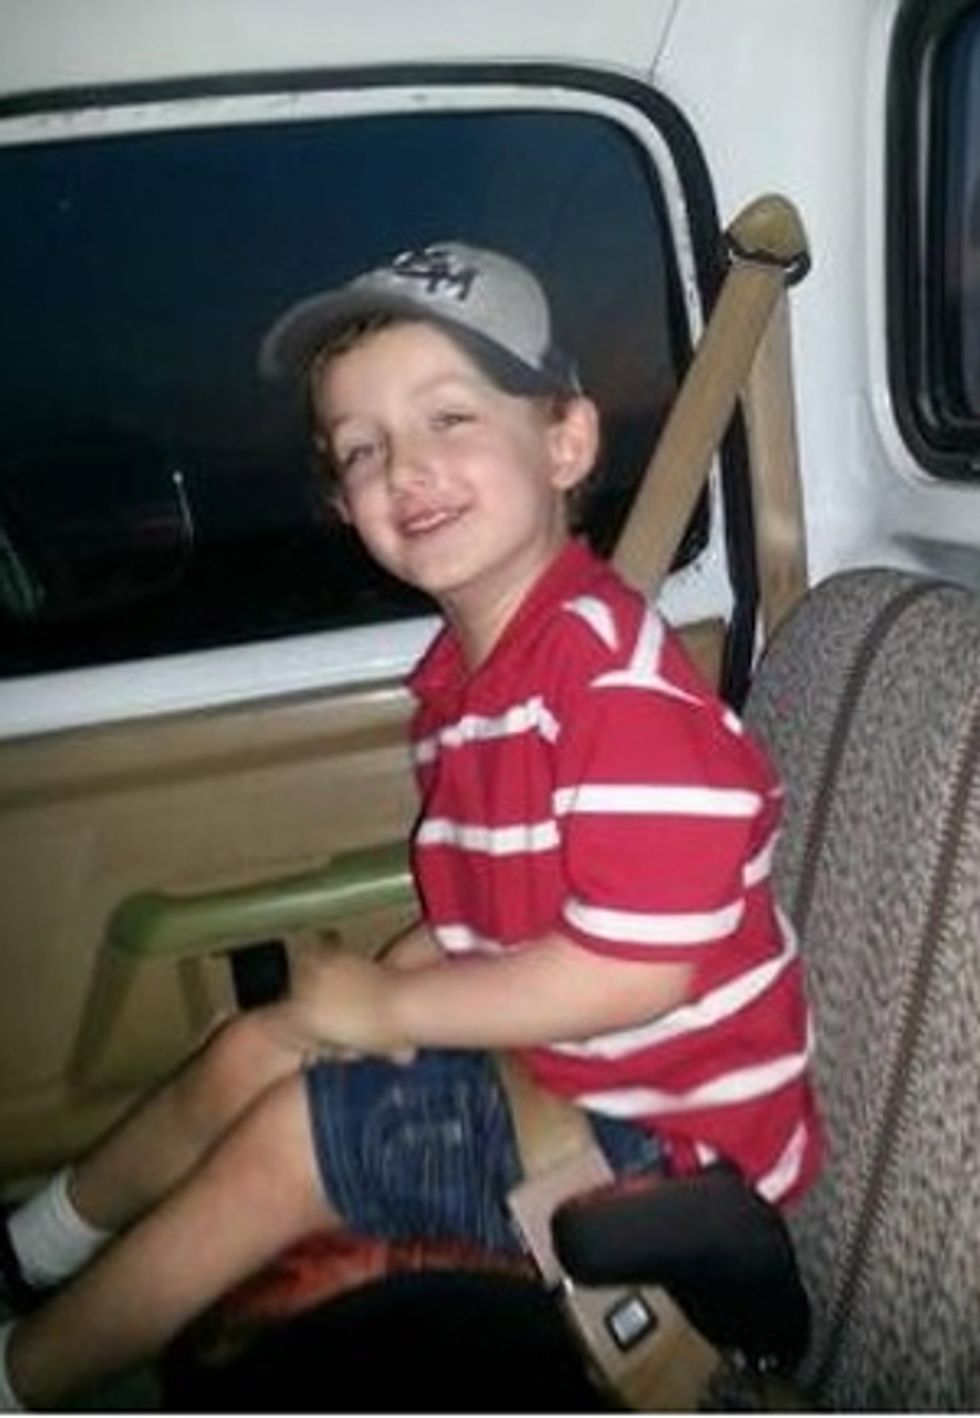 Louisiana Cops Who Killed Autistic Six-Year-Old Might Be Very Bad Men